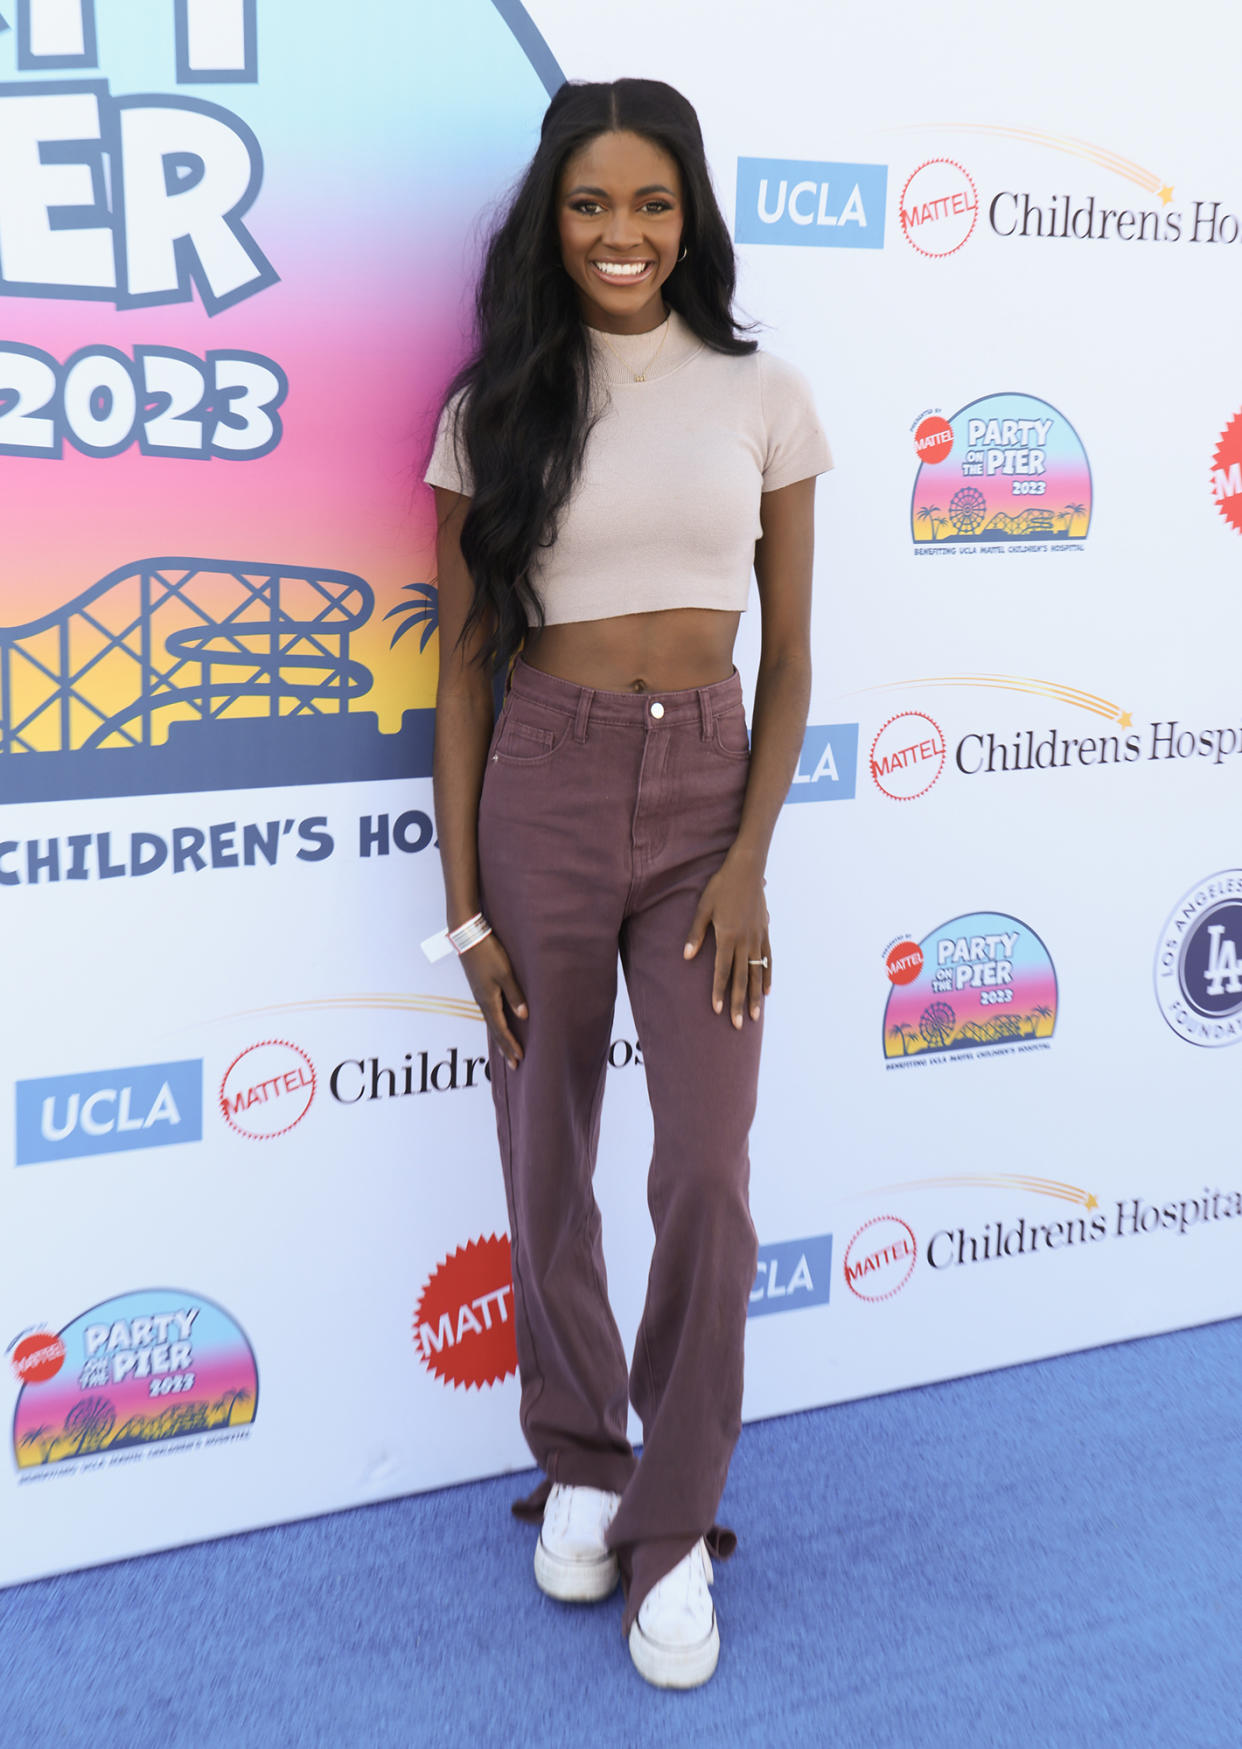 Charity Lawson at the 24th annual Party on the Pier in Santa Monica, CA on November 5, 2023.